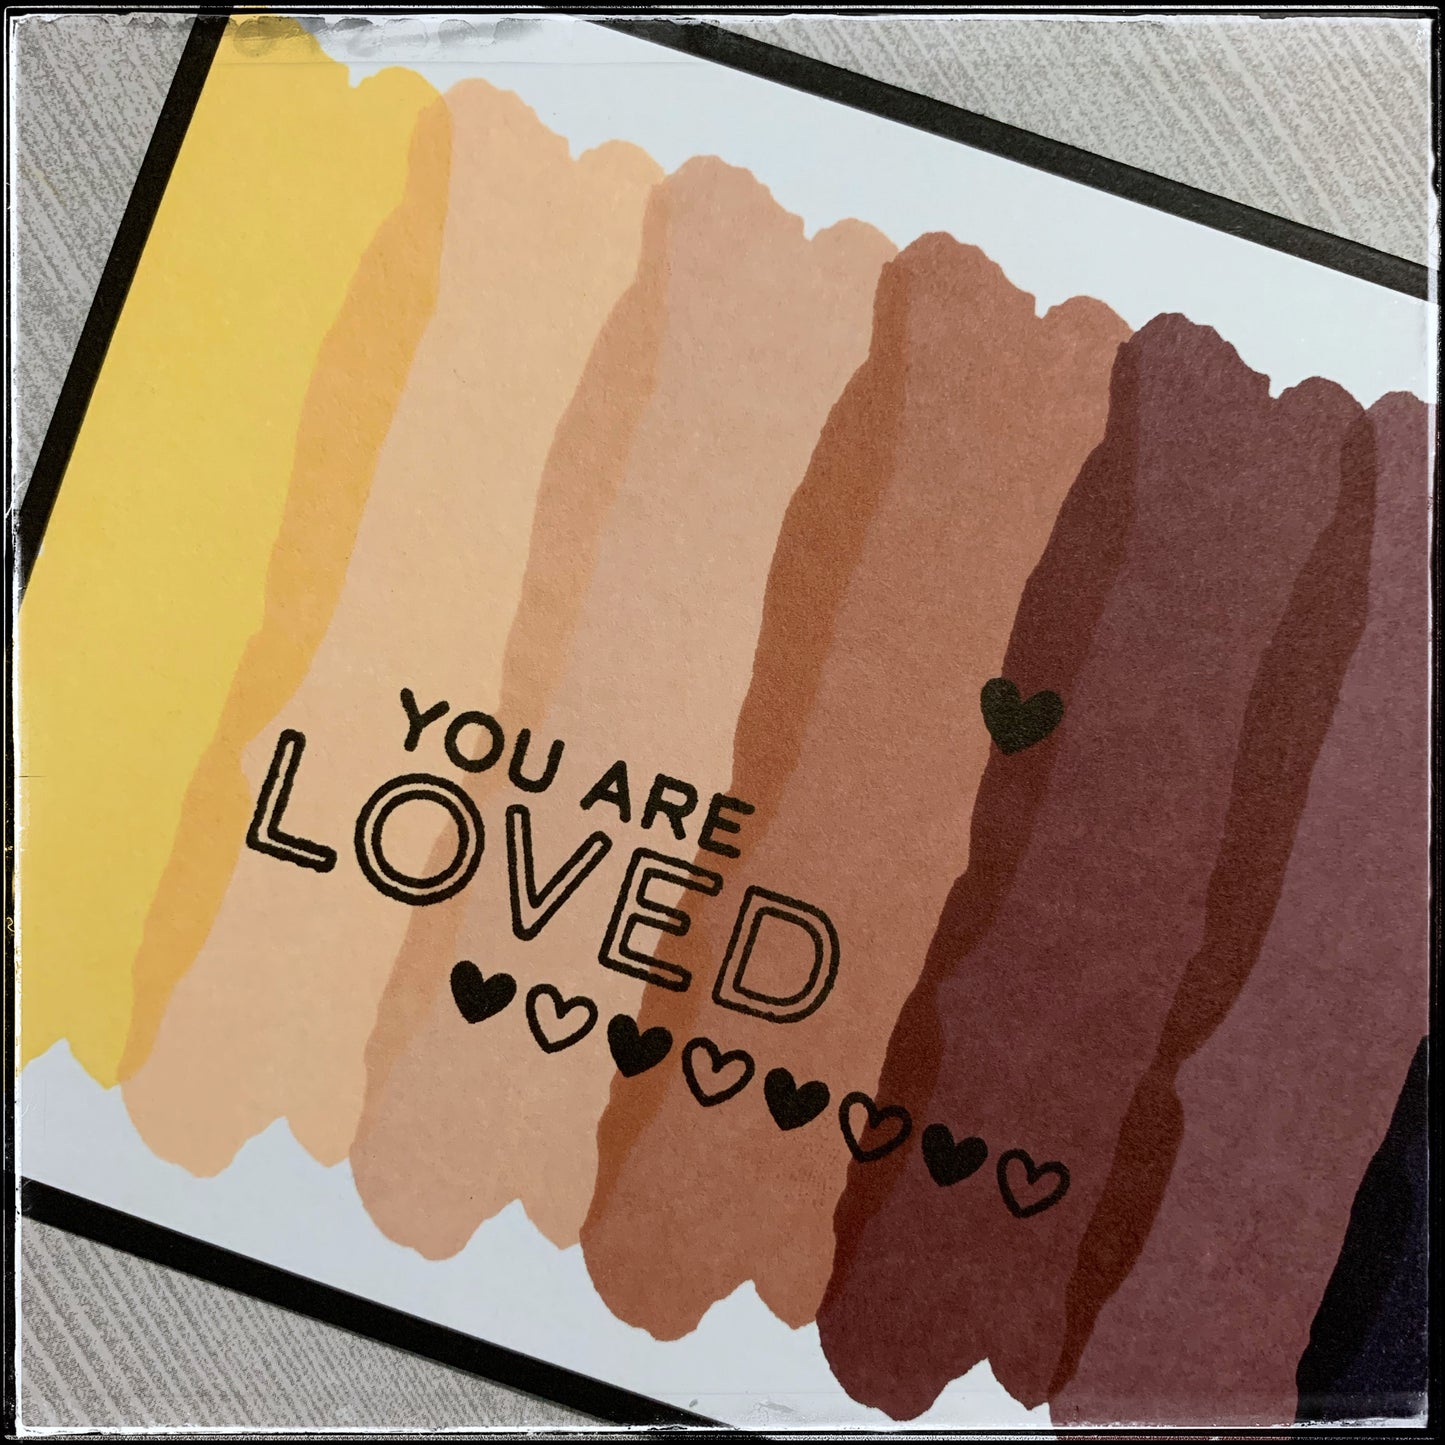 You Are Loved [Humankind]